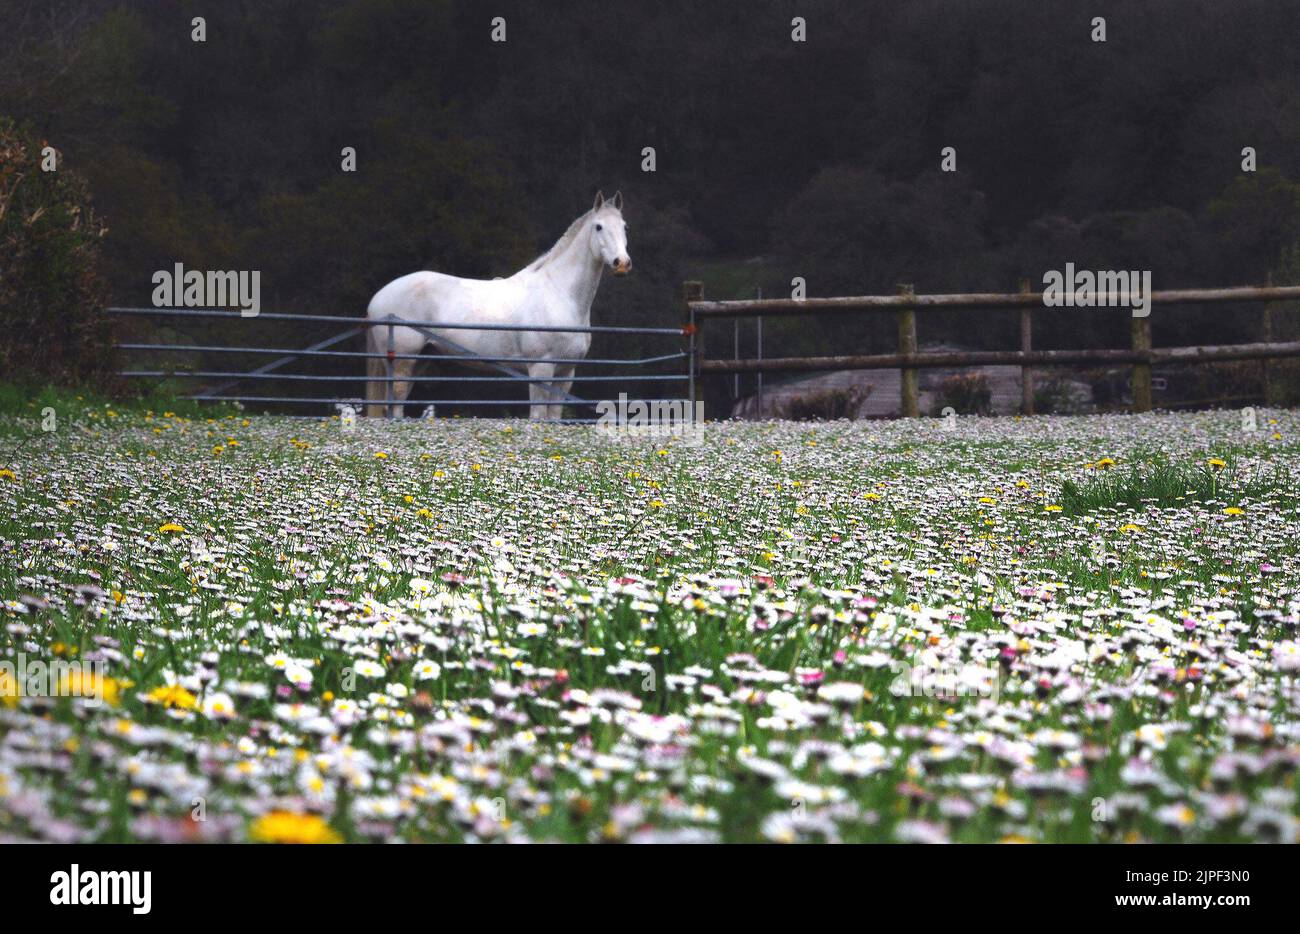 WARM SPRING TEMPERATURES AND LONG SPELLS OF SUNSHINE ARE CAUSING DANDELIONS AND DAISIES TO BLOOM IN HUGE NUMBERS ACROSS HAMPSHIRE A PURE WHITE HORSE LOOKS OUT OVER A SEA OF DAISIES THAT COVERS ITS PASTURE IN THE SPRING SUNSHINE AT BISHOPS WALTHAM IN HAMPSHIRE. PIC MIKE WALKER, MIKE WALKER PICTURES, 125 THE KEEP, PORTCHESTER, HANTS PO16 9PR TEL. 07747012287 e.mail. walker.mike@ntlworld.com Stock Photo